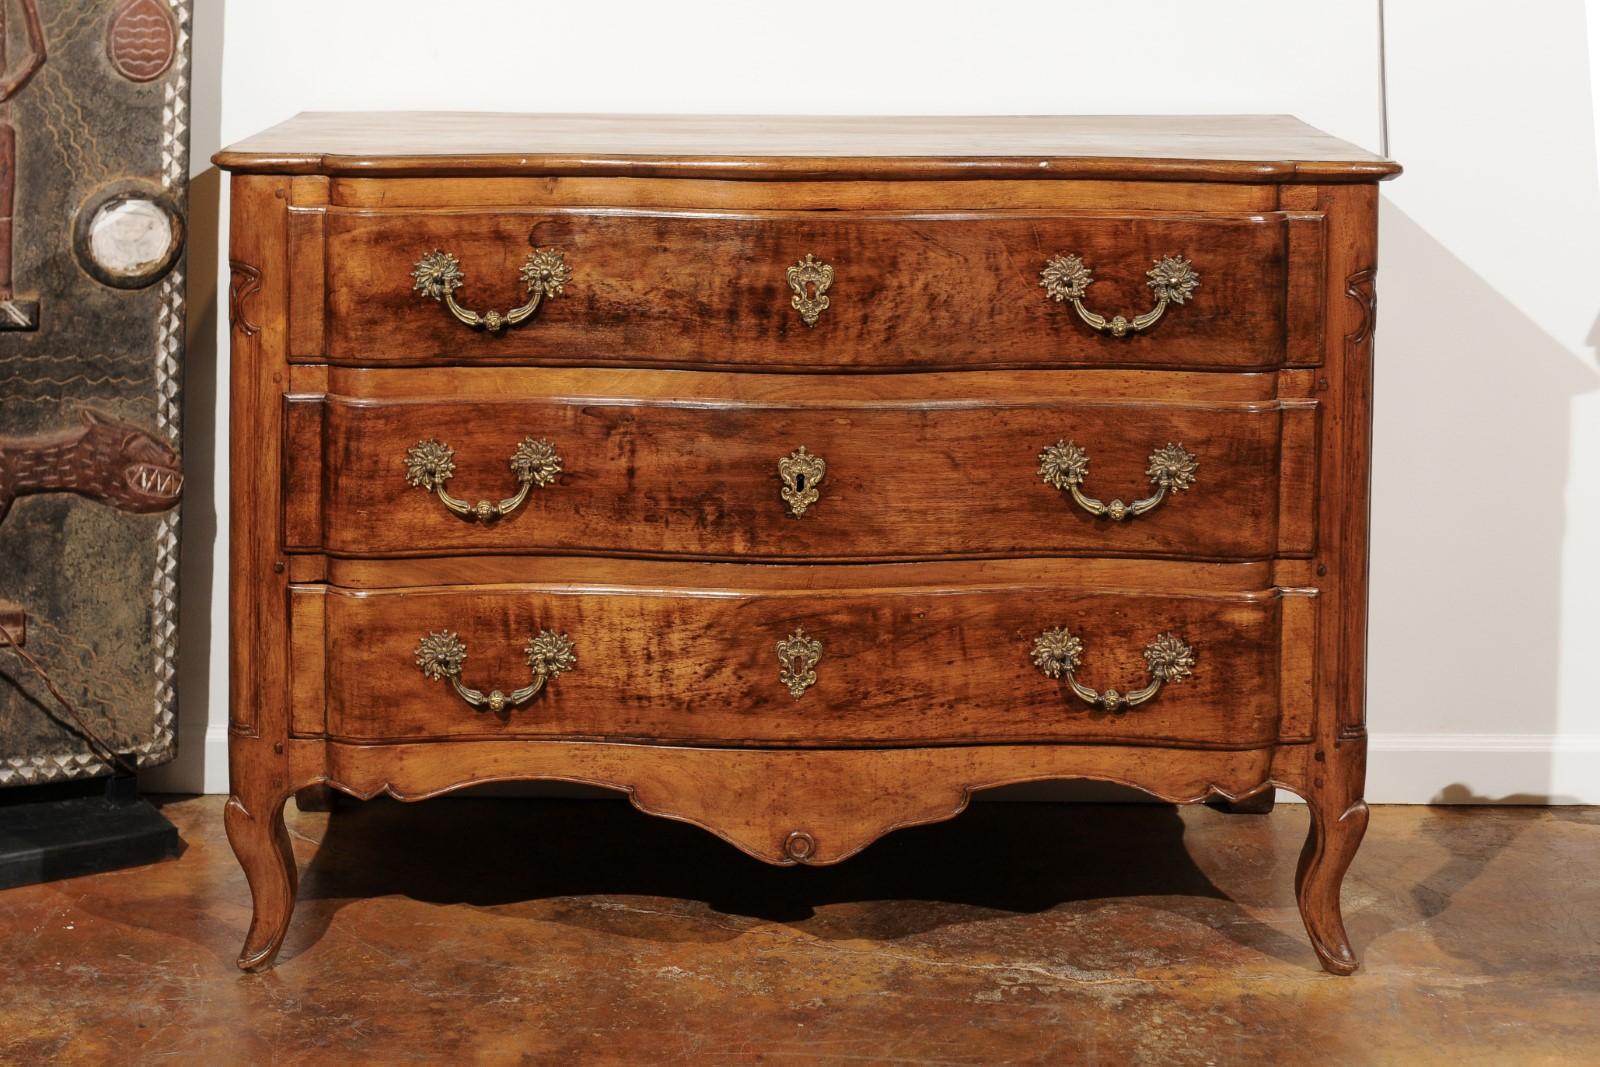 A French Louis XV period walnut commode from the mid-18th century, with serpentine front, three drawers and scalloped apron. Born in France during the reign of King Louis XV nicknamed at the time the Bien-Aimé (the beloved), this exquisite walnut